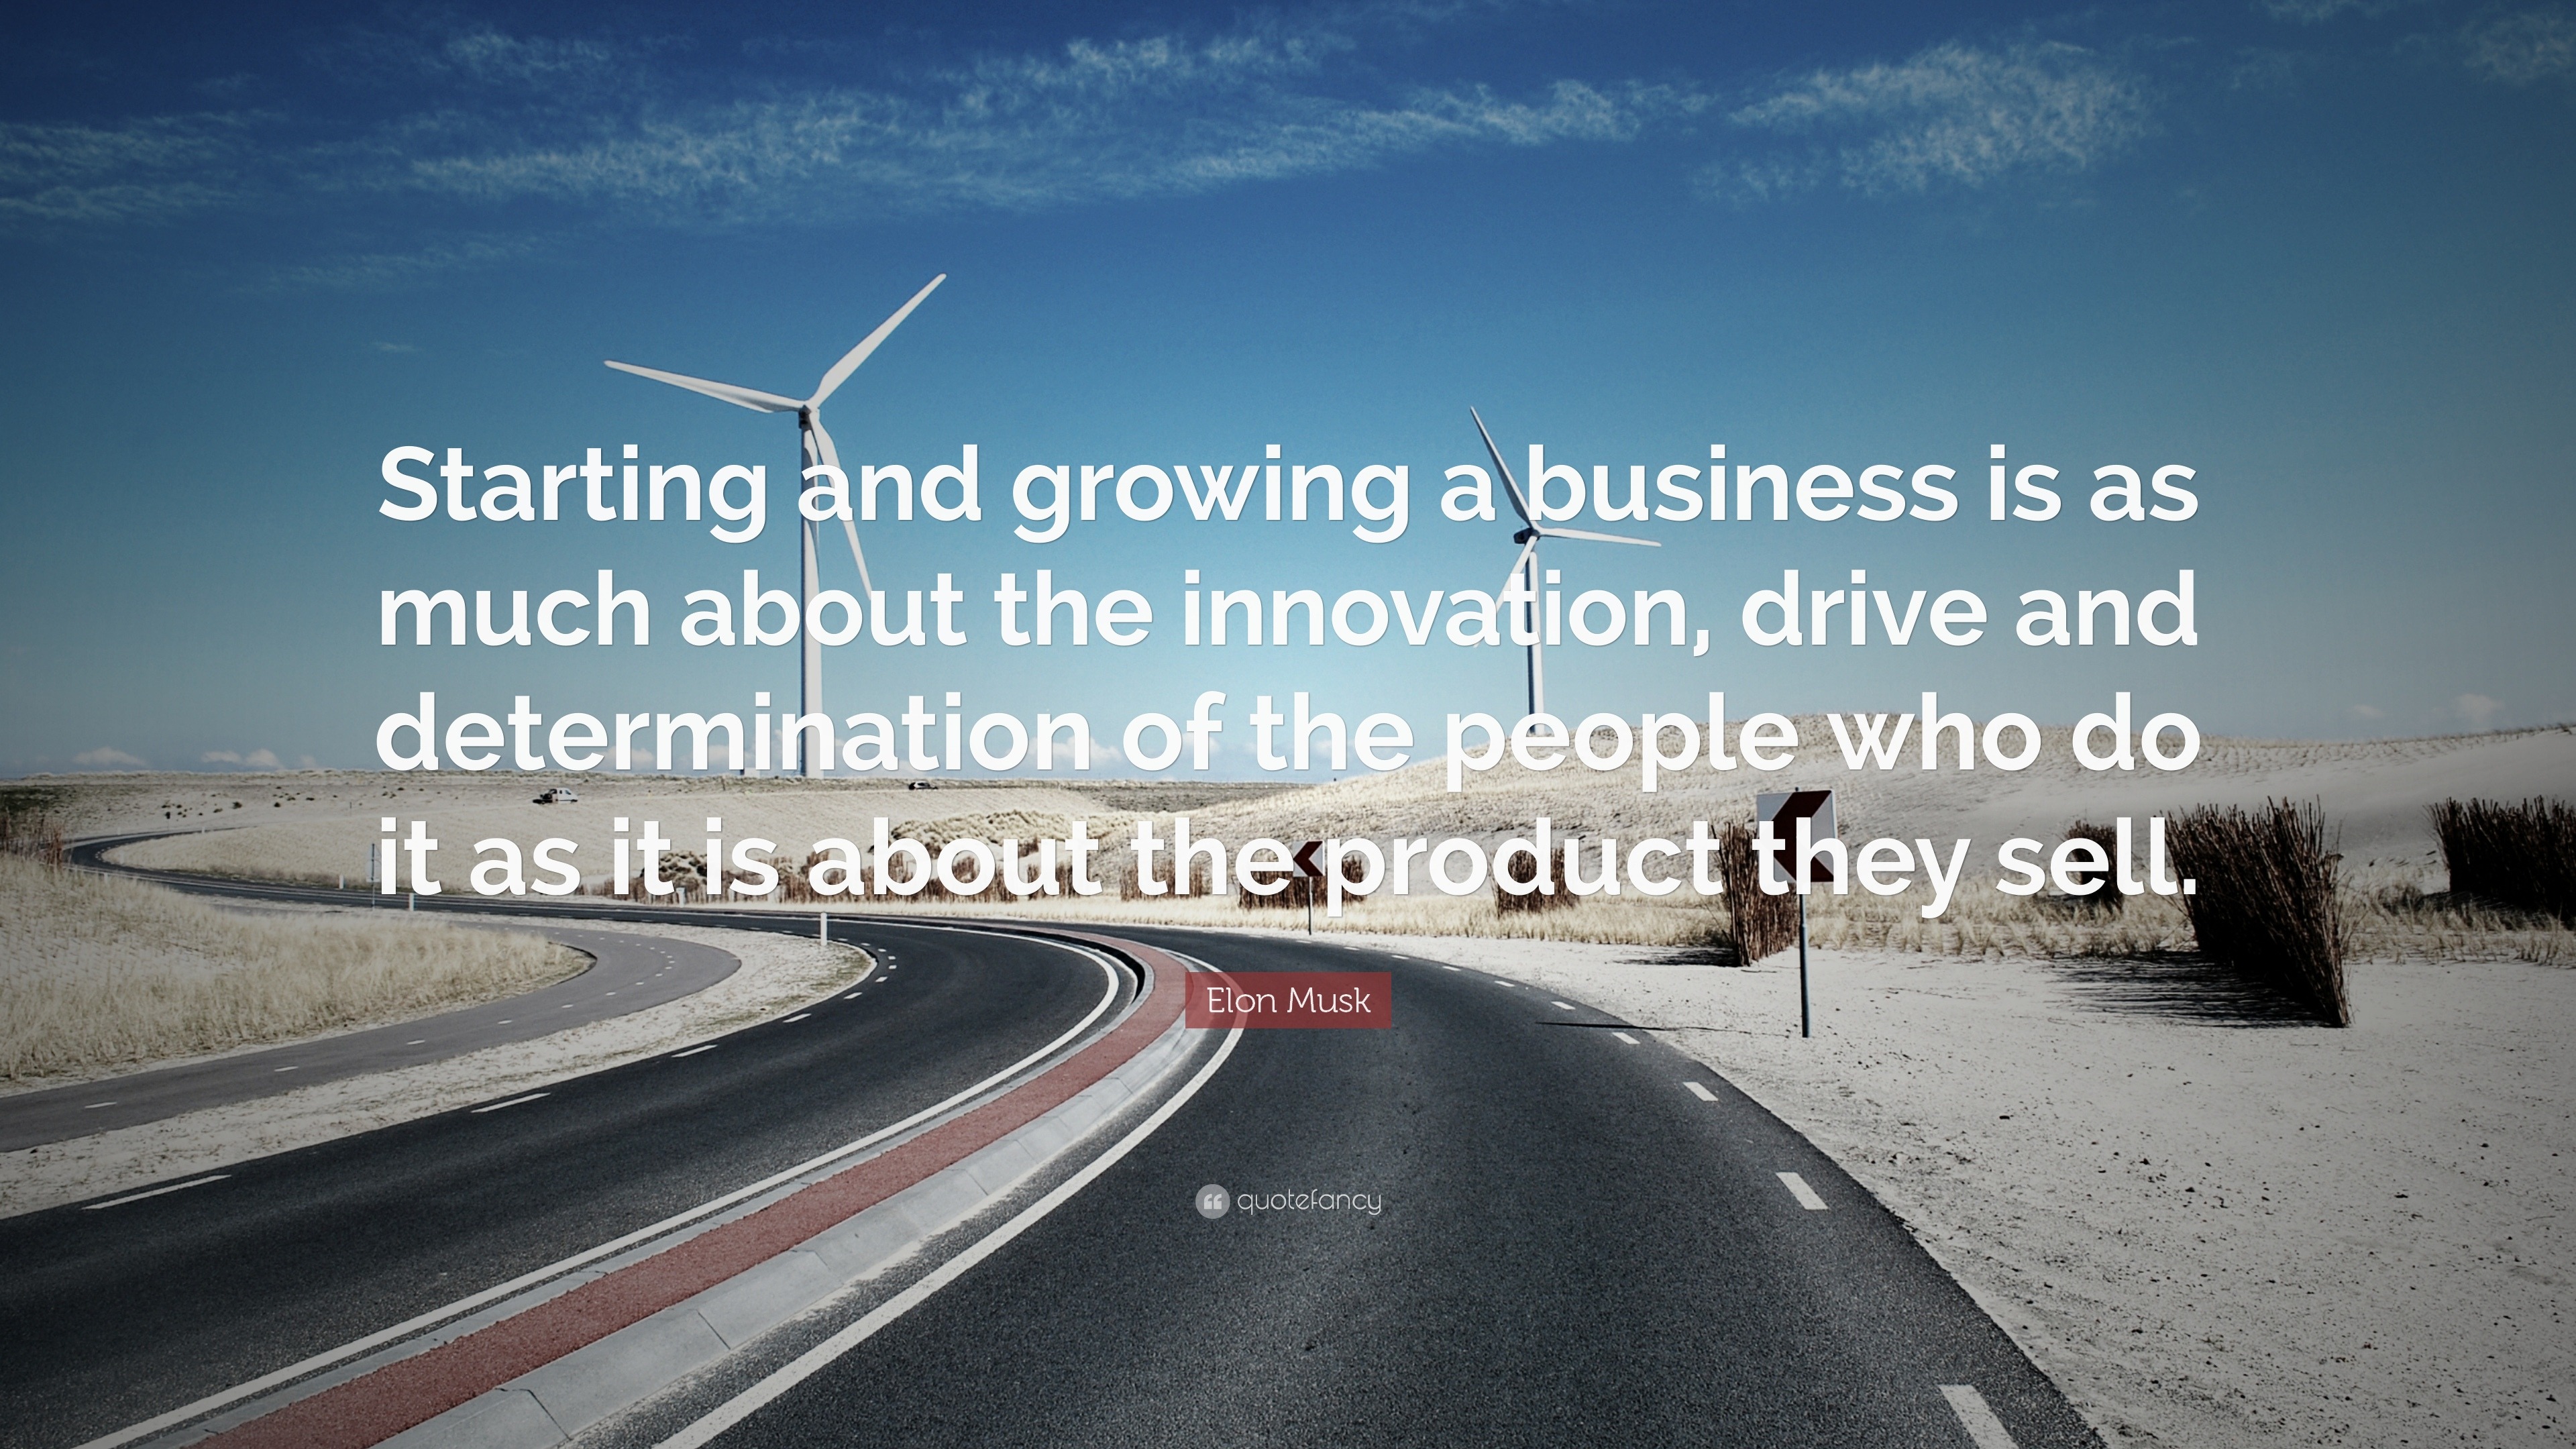 Elon Musk Quote: “Starting and growing a business is as much about the